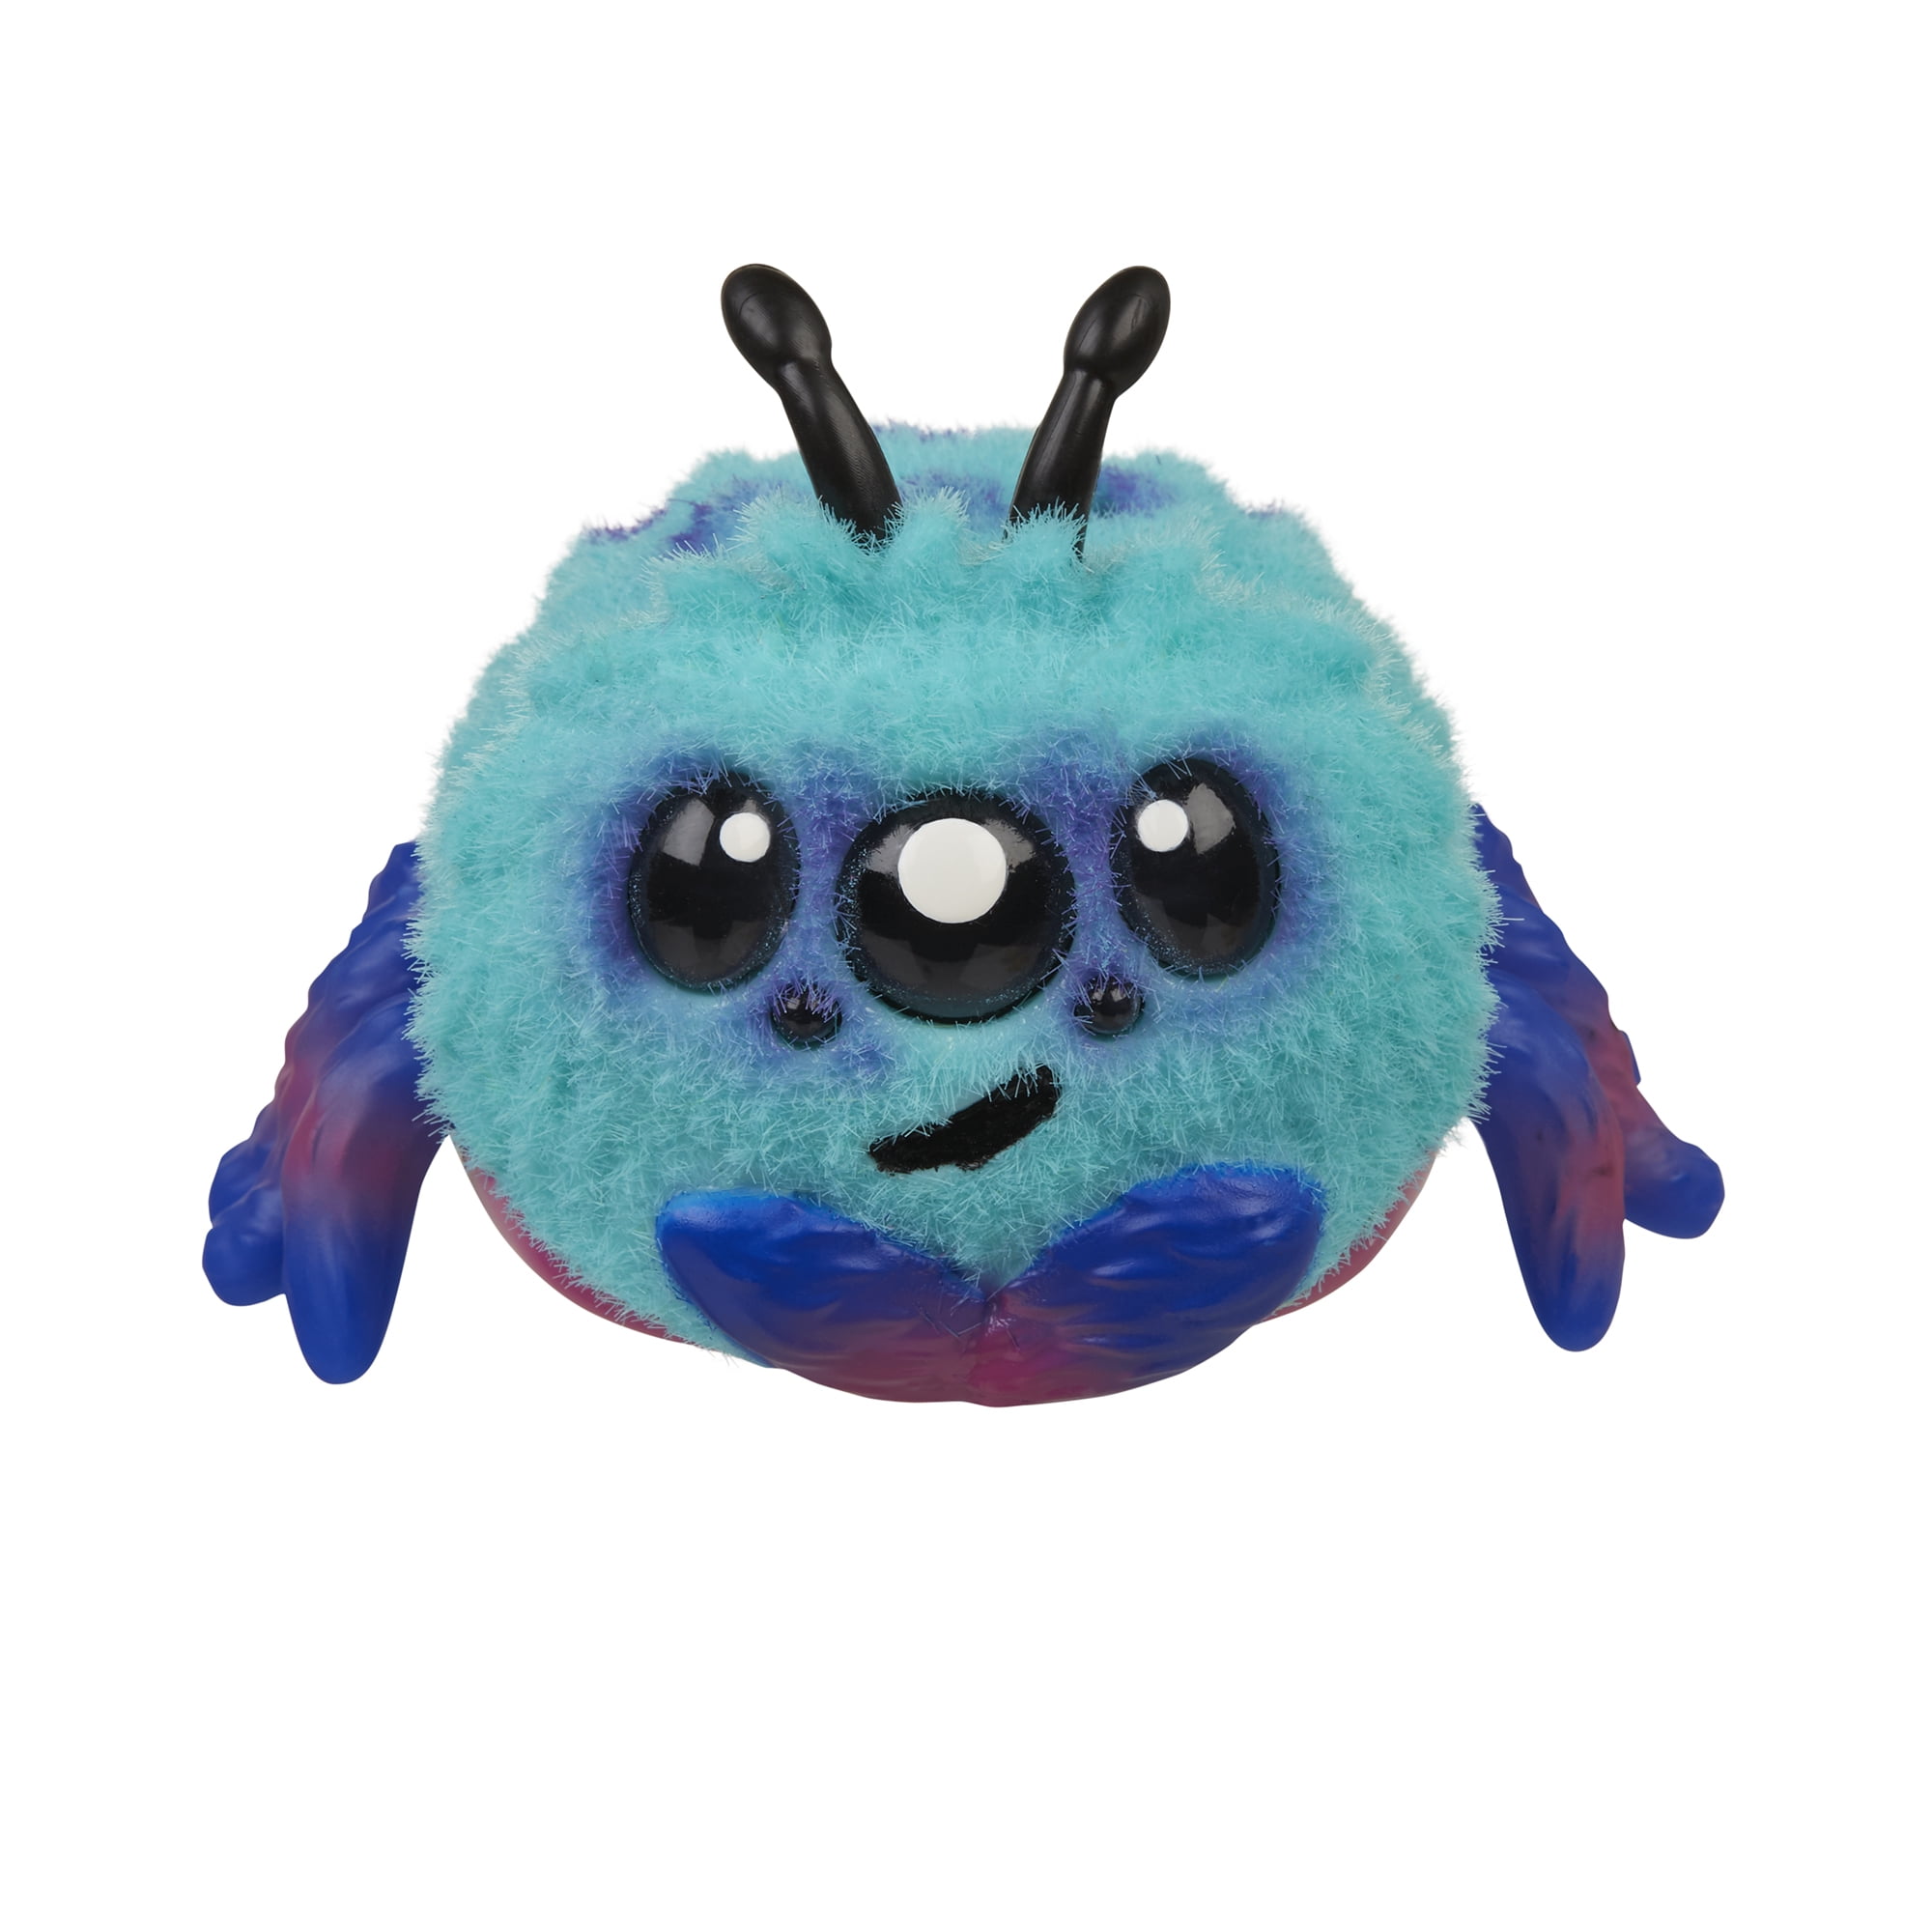 Yellies Webington Voice-activated Spider Pet Fuzzbo Pink Ages 5 for sale online 